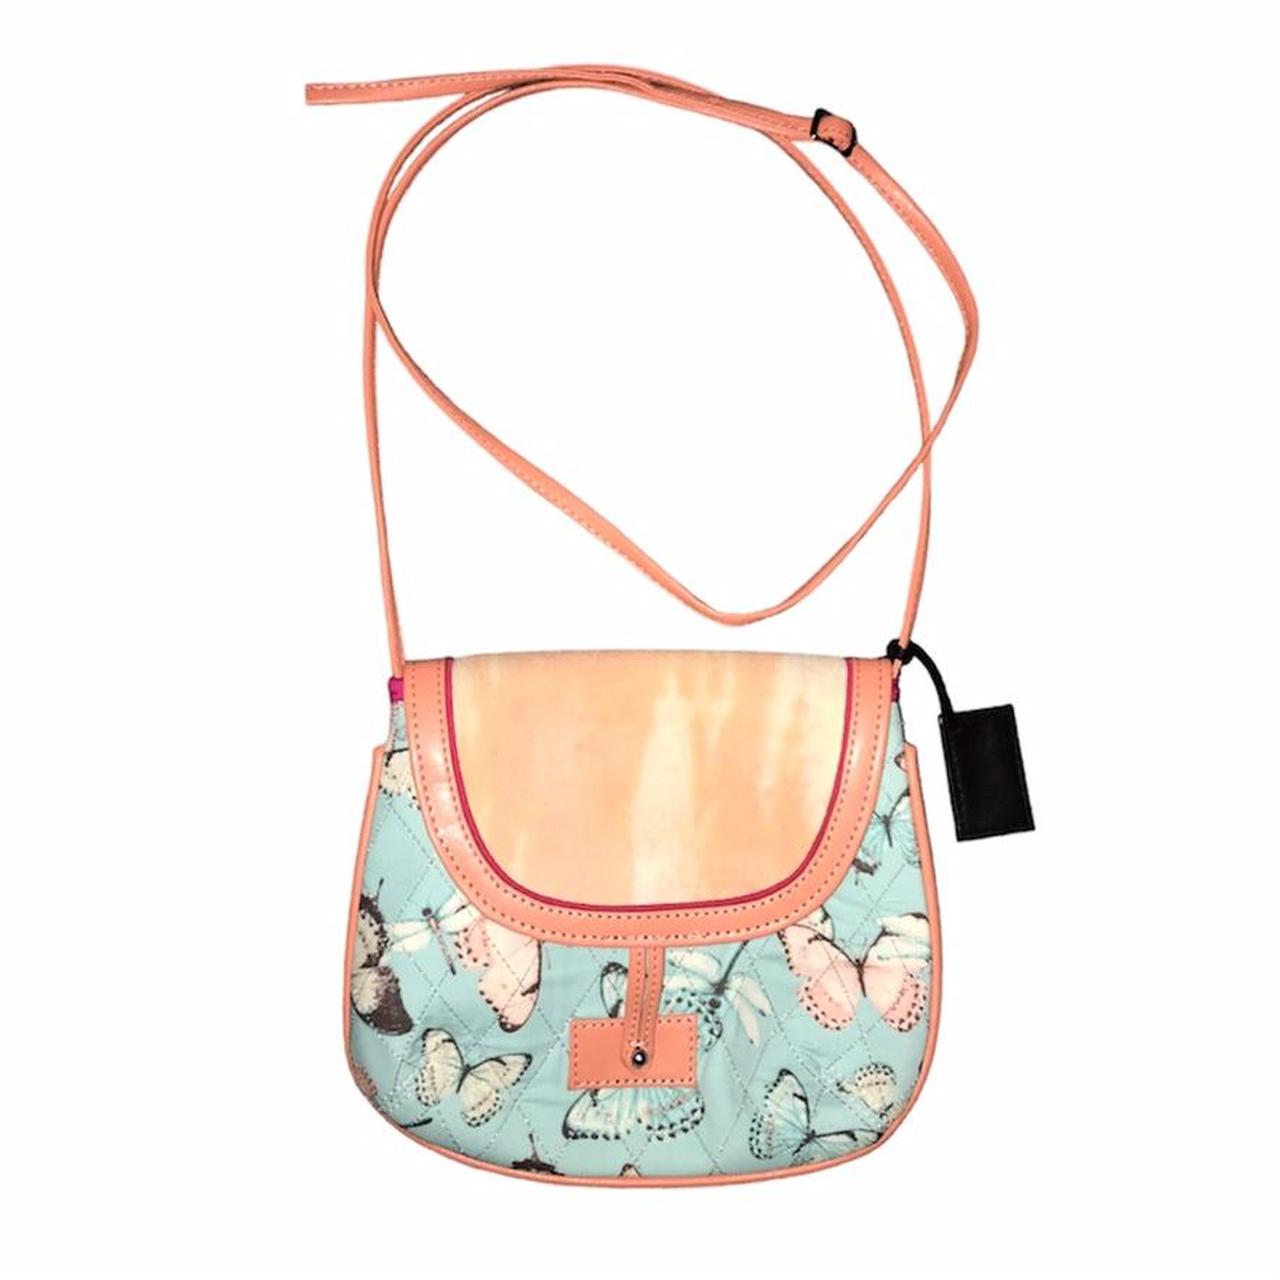 Let Me Find Out' Pink Purse – Satori Mob